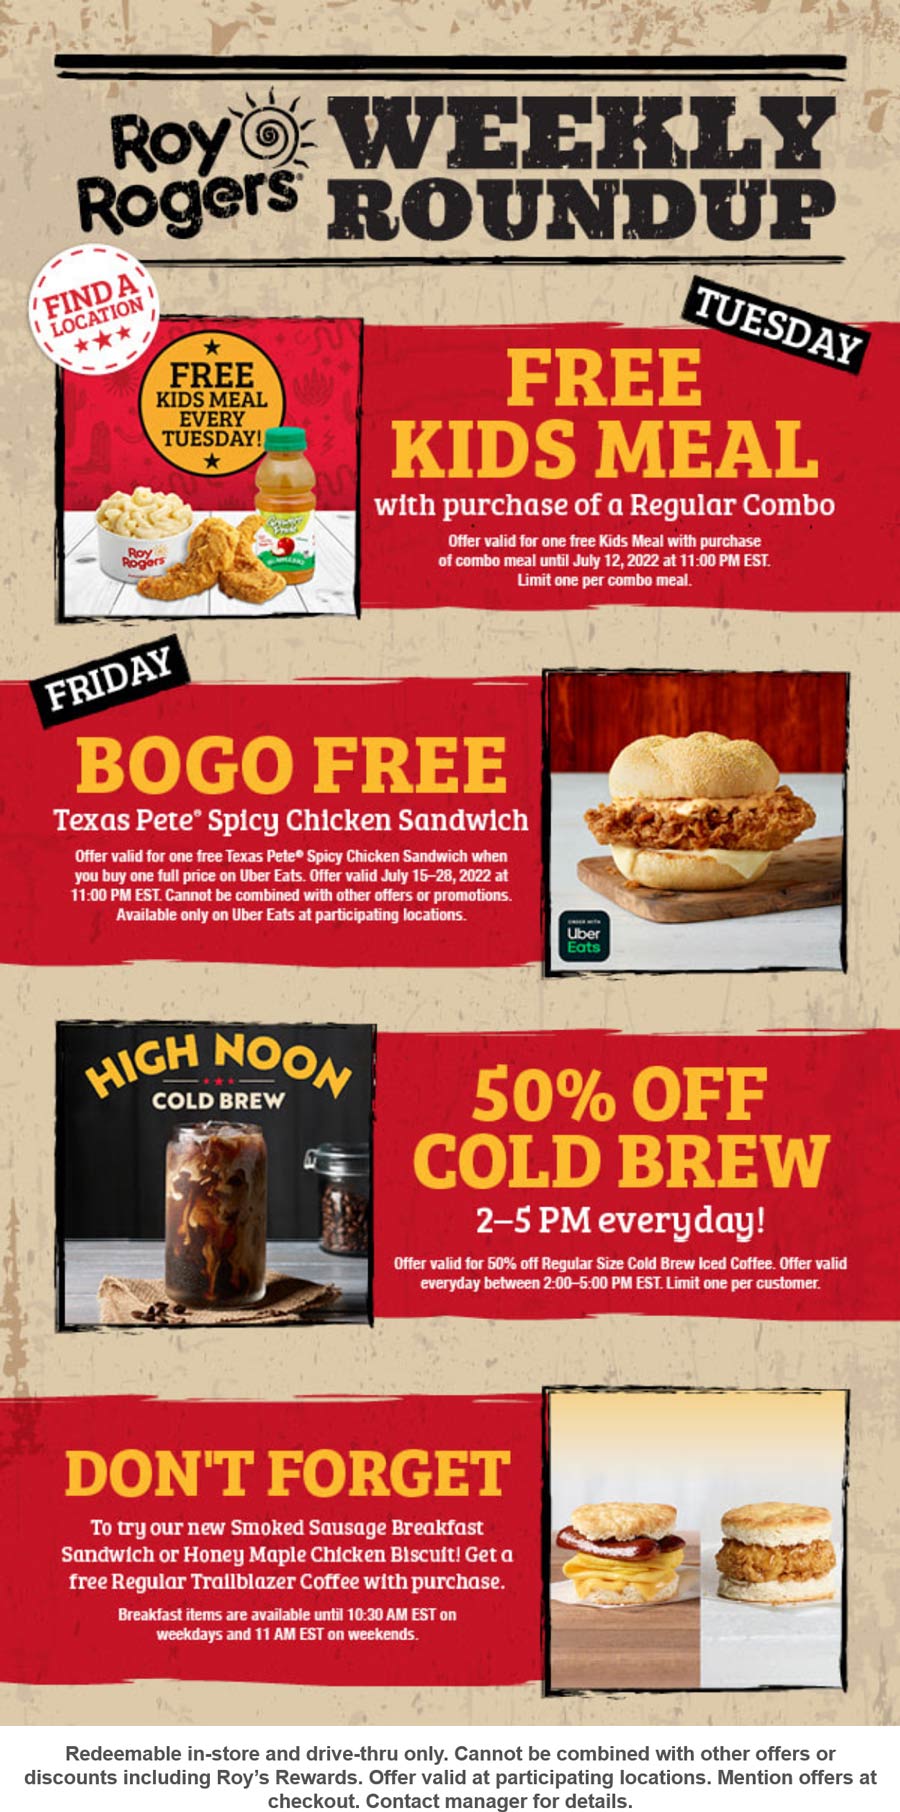 Roy Rogers restaurants Coupon  Free coffee, kids meal & chicken sandwich this week at Roy Rogers #royrogers 